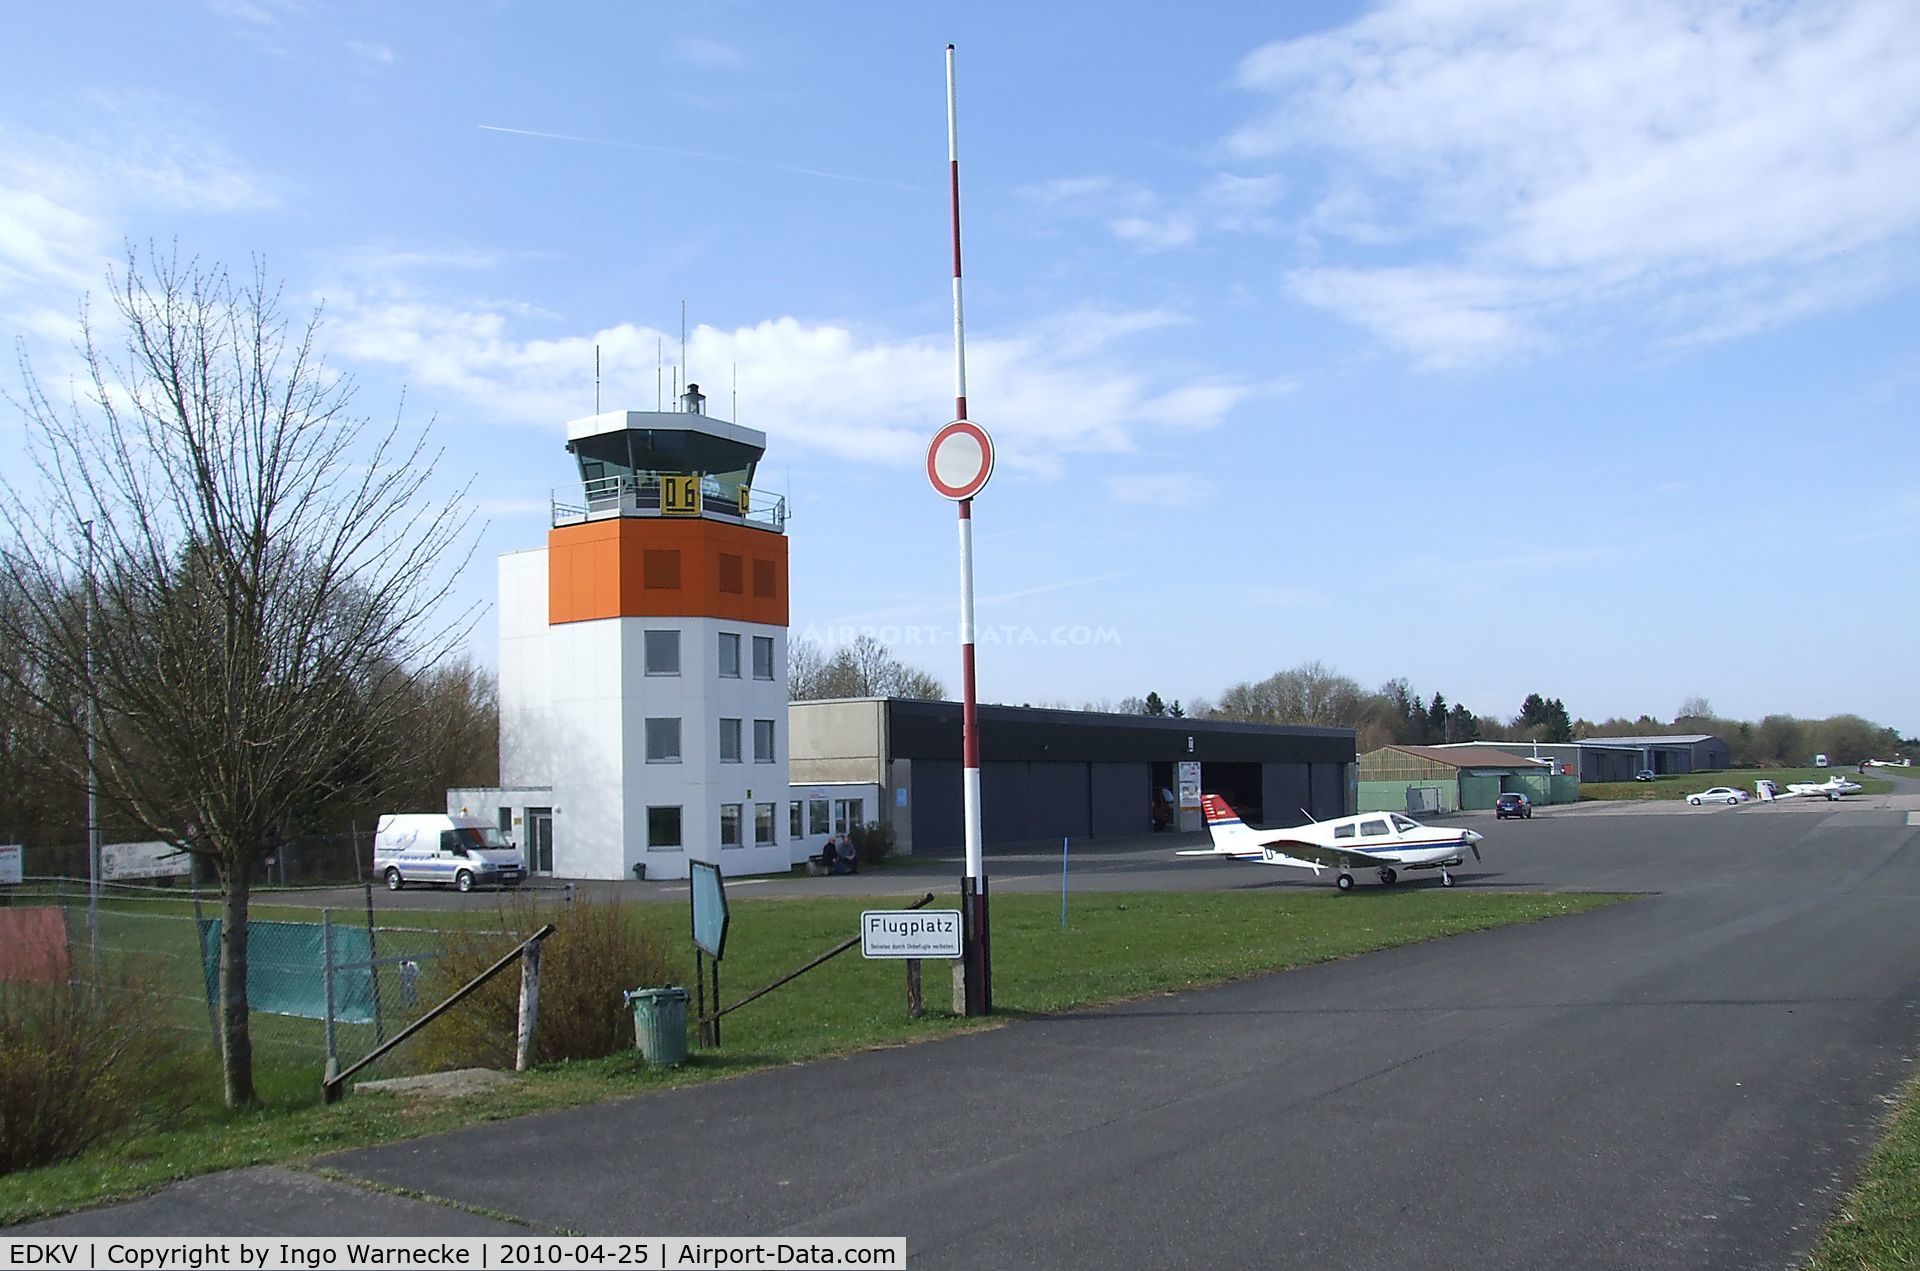 Dahlemer Binz Airport, Dahlem Germany (EDKV) - control tower and hangars in the western part